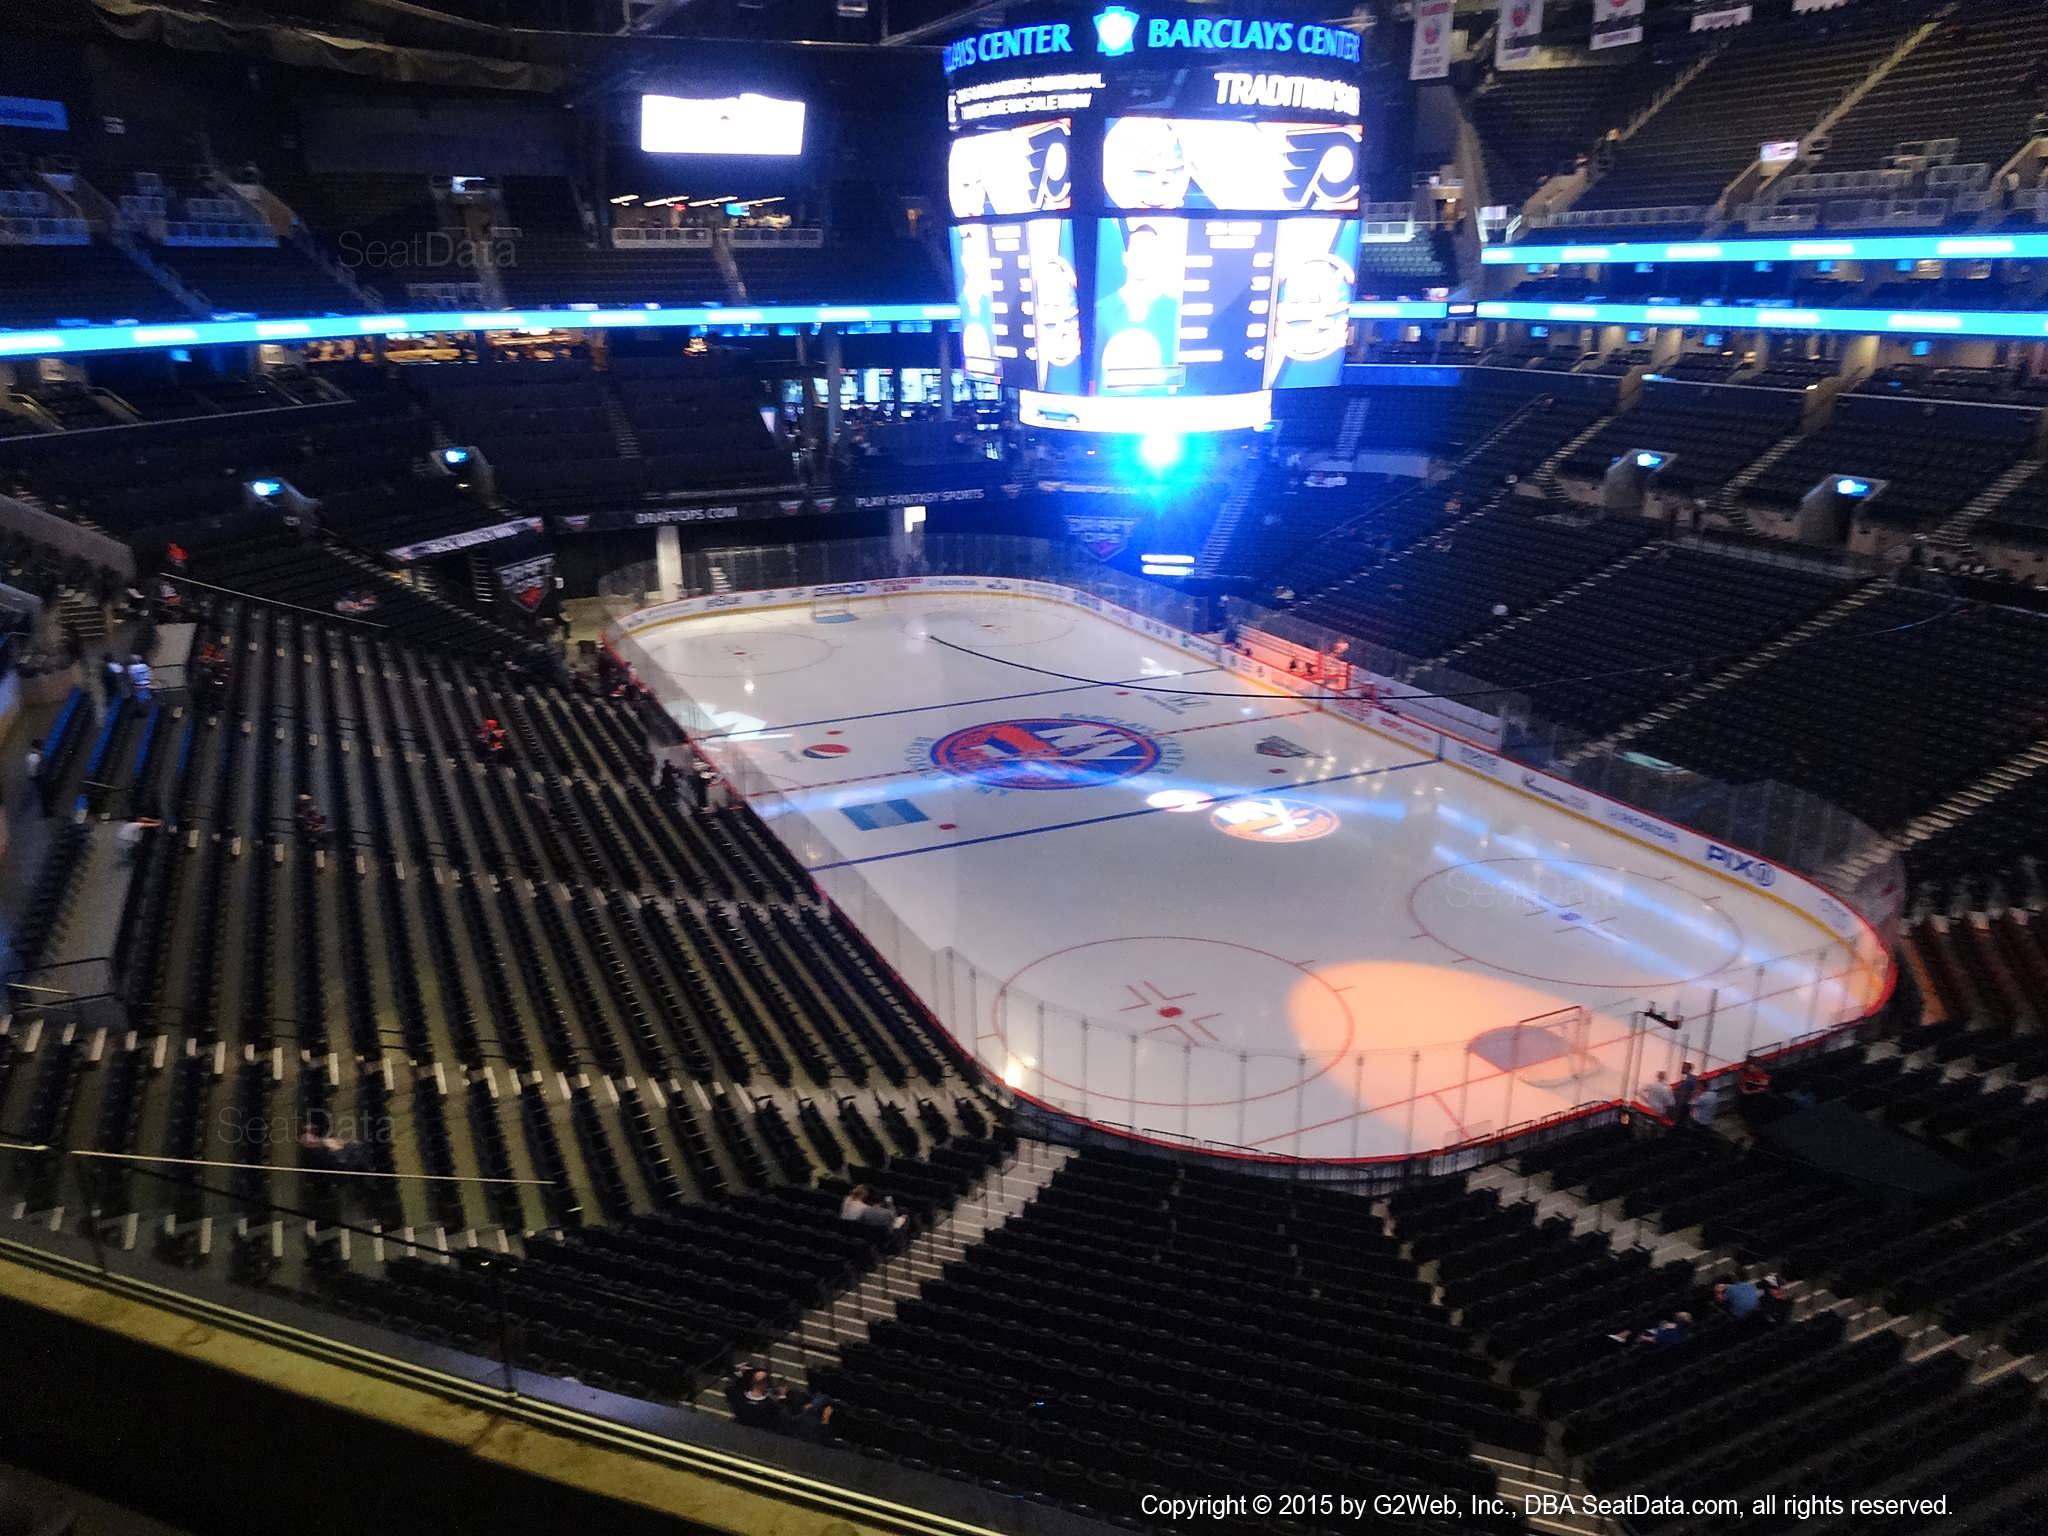 Seat View from Section 219 at the Barclays Center, home of the New York Islanders